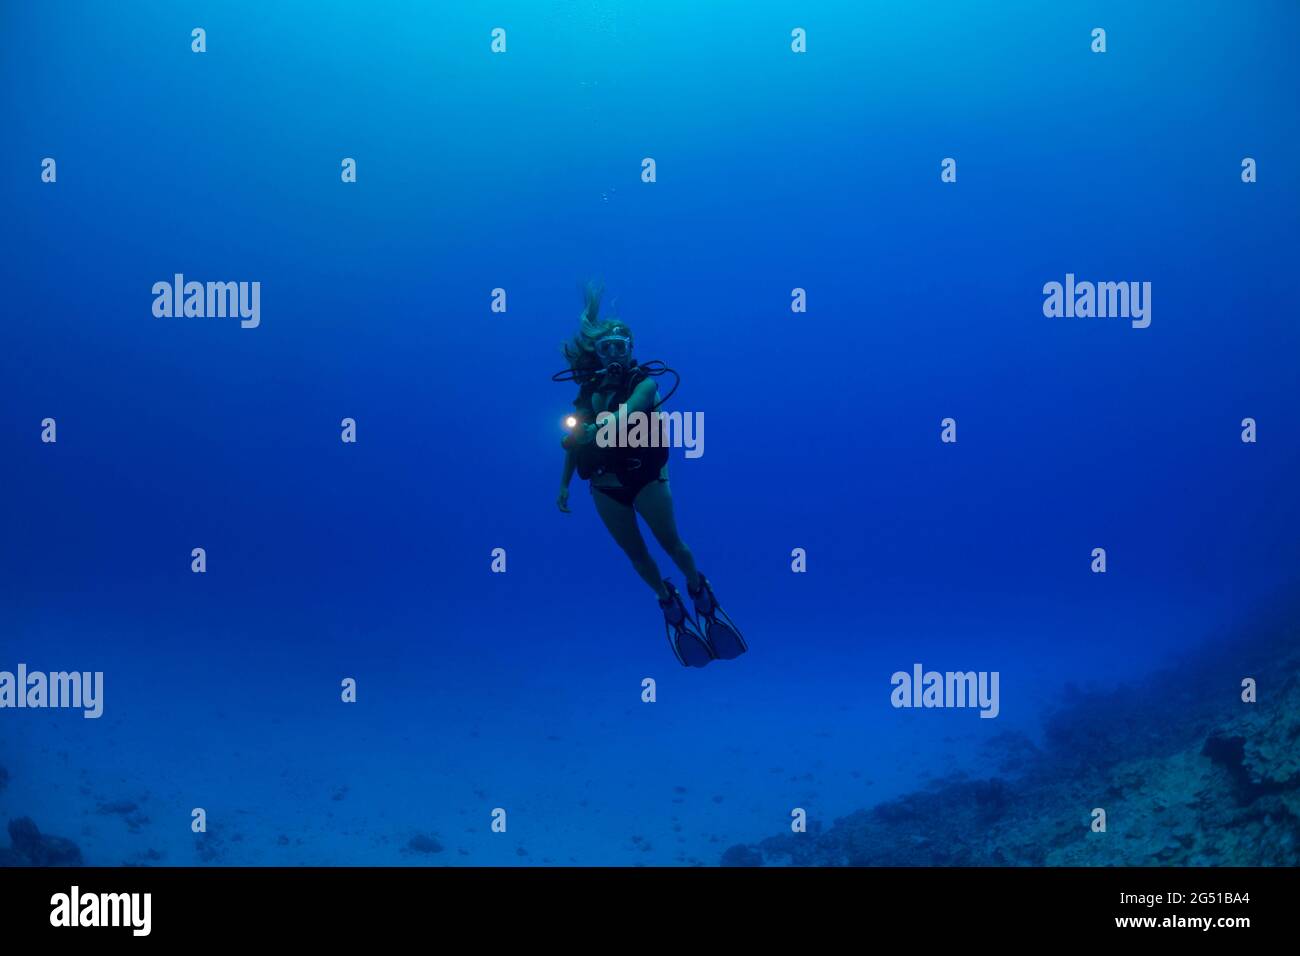 A young lady (MR) shining a light, scuba diving in midwater off the island of Yap, Micronesia. Stock Photo